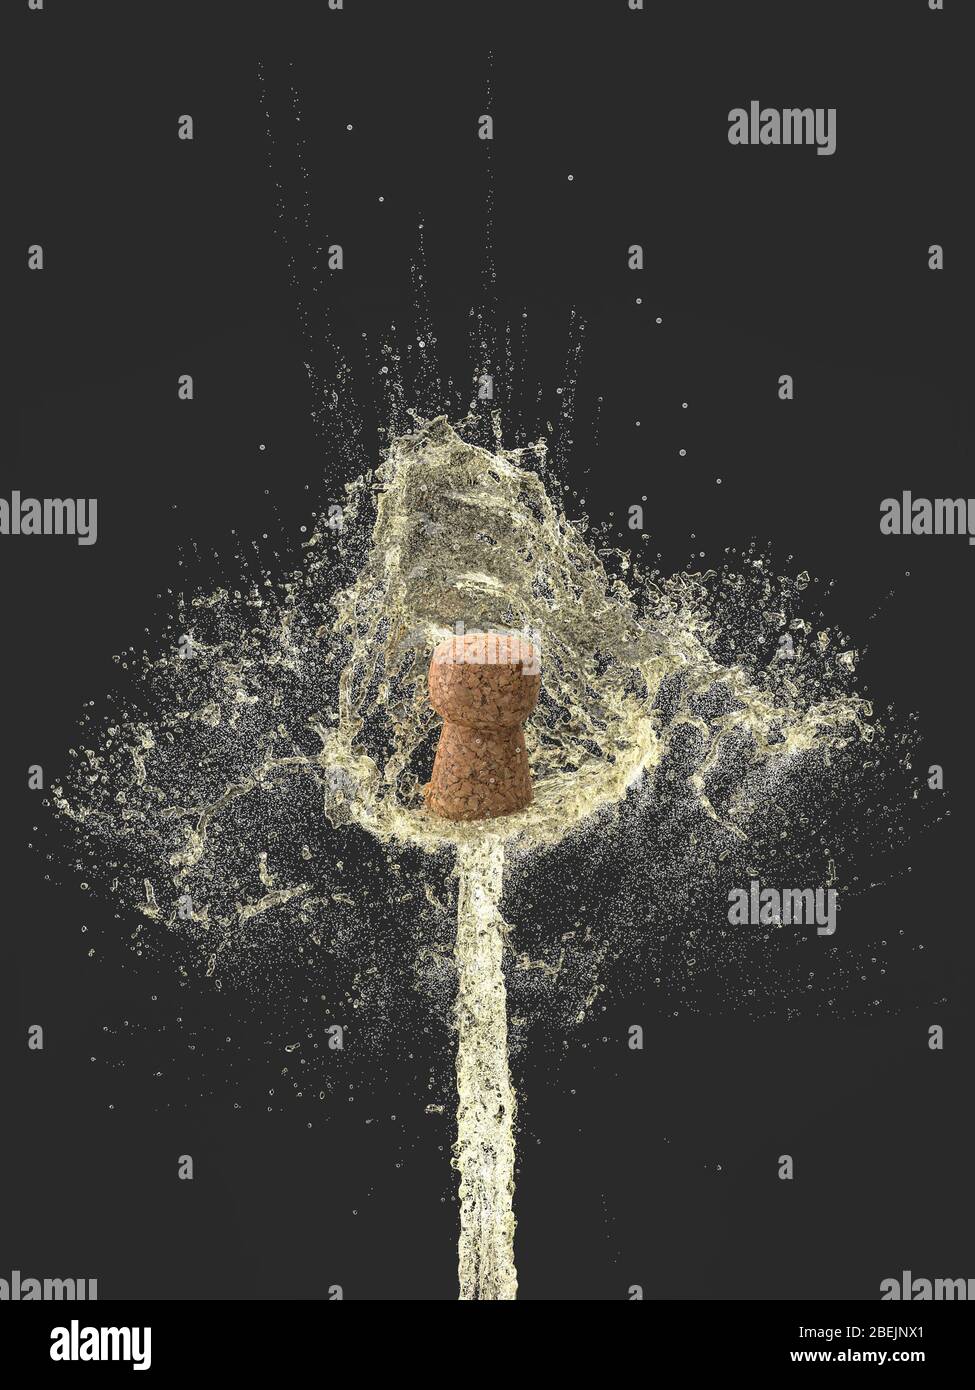 detail of the explosion of a cork of a bottle of champagne. Splashing wine on dark background. concept for celebration, party, holidays. 3d render ima Stock Photo